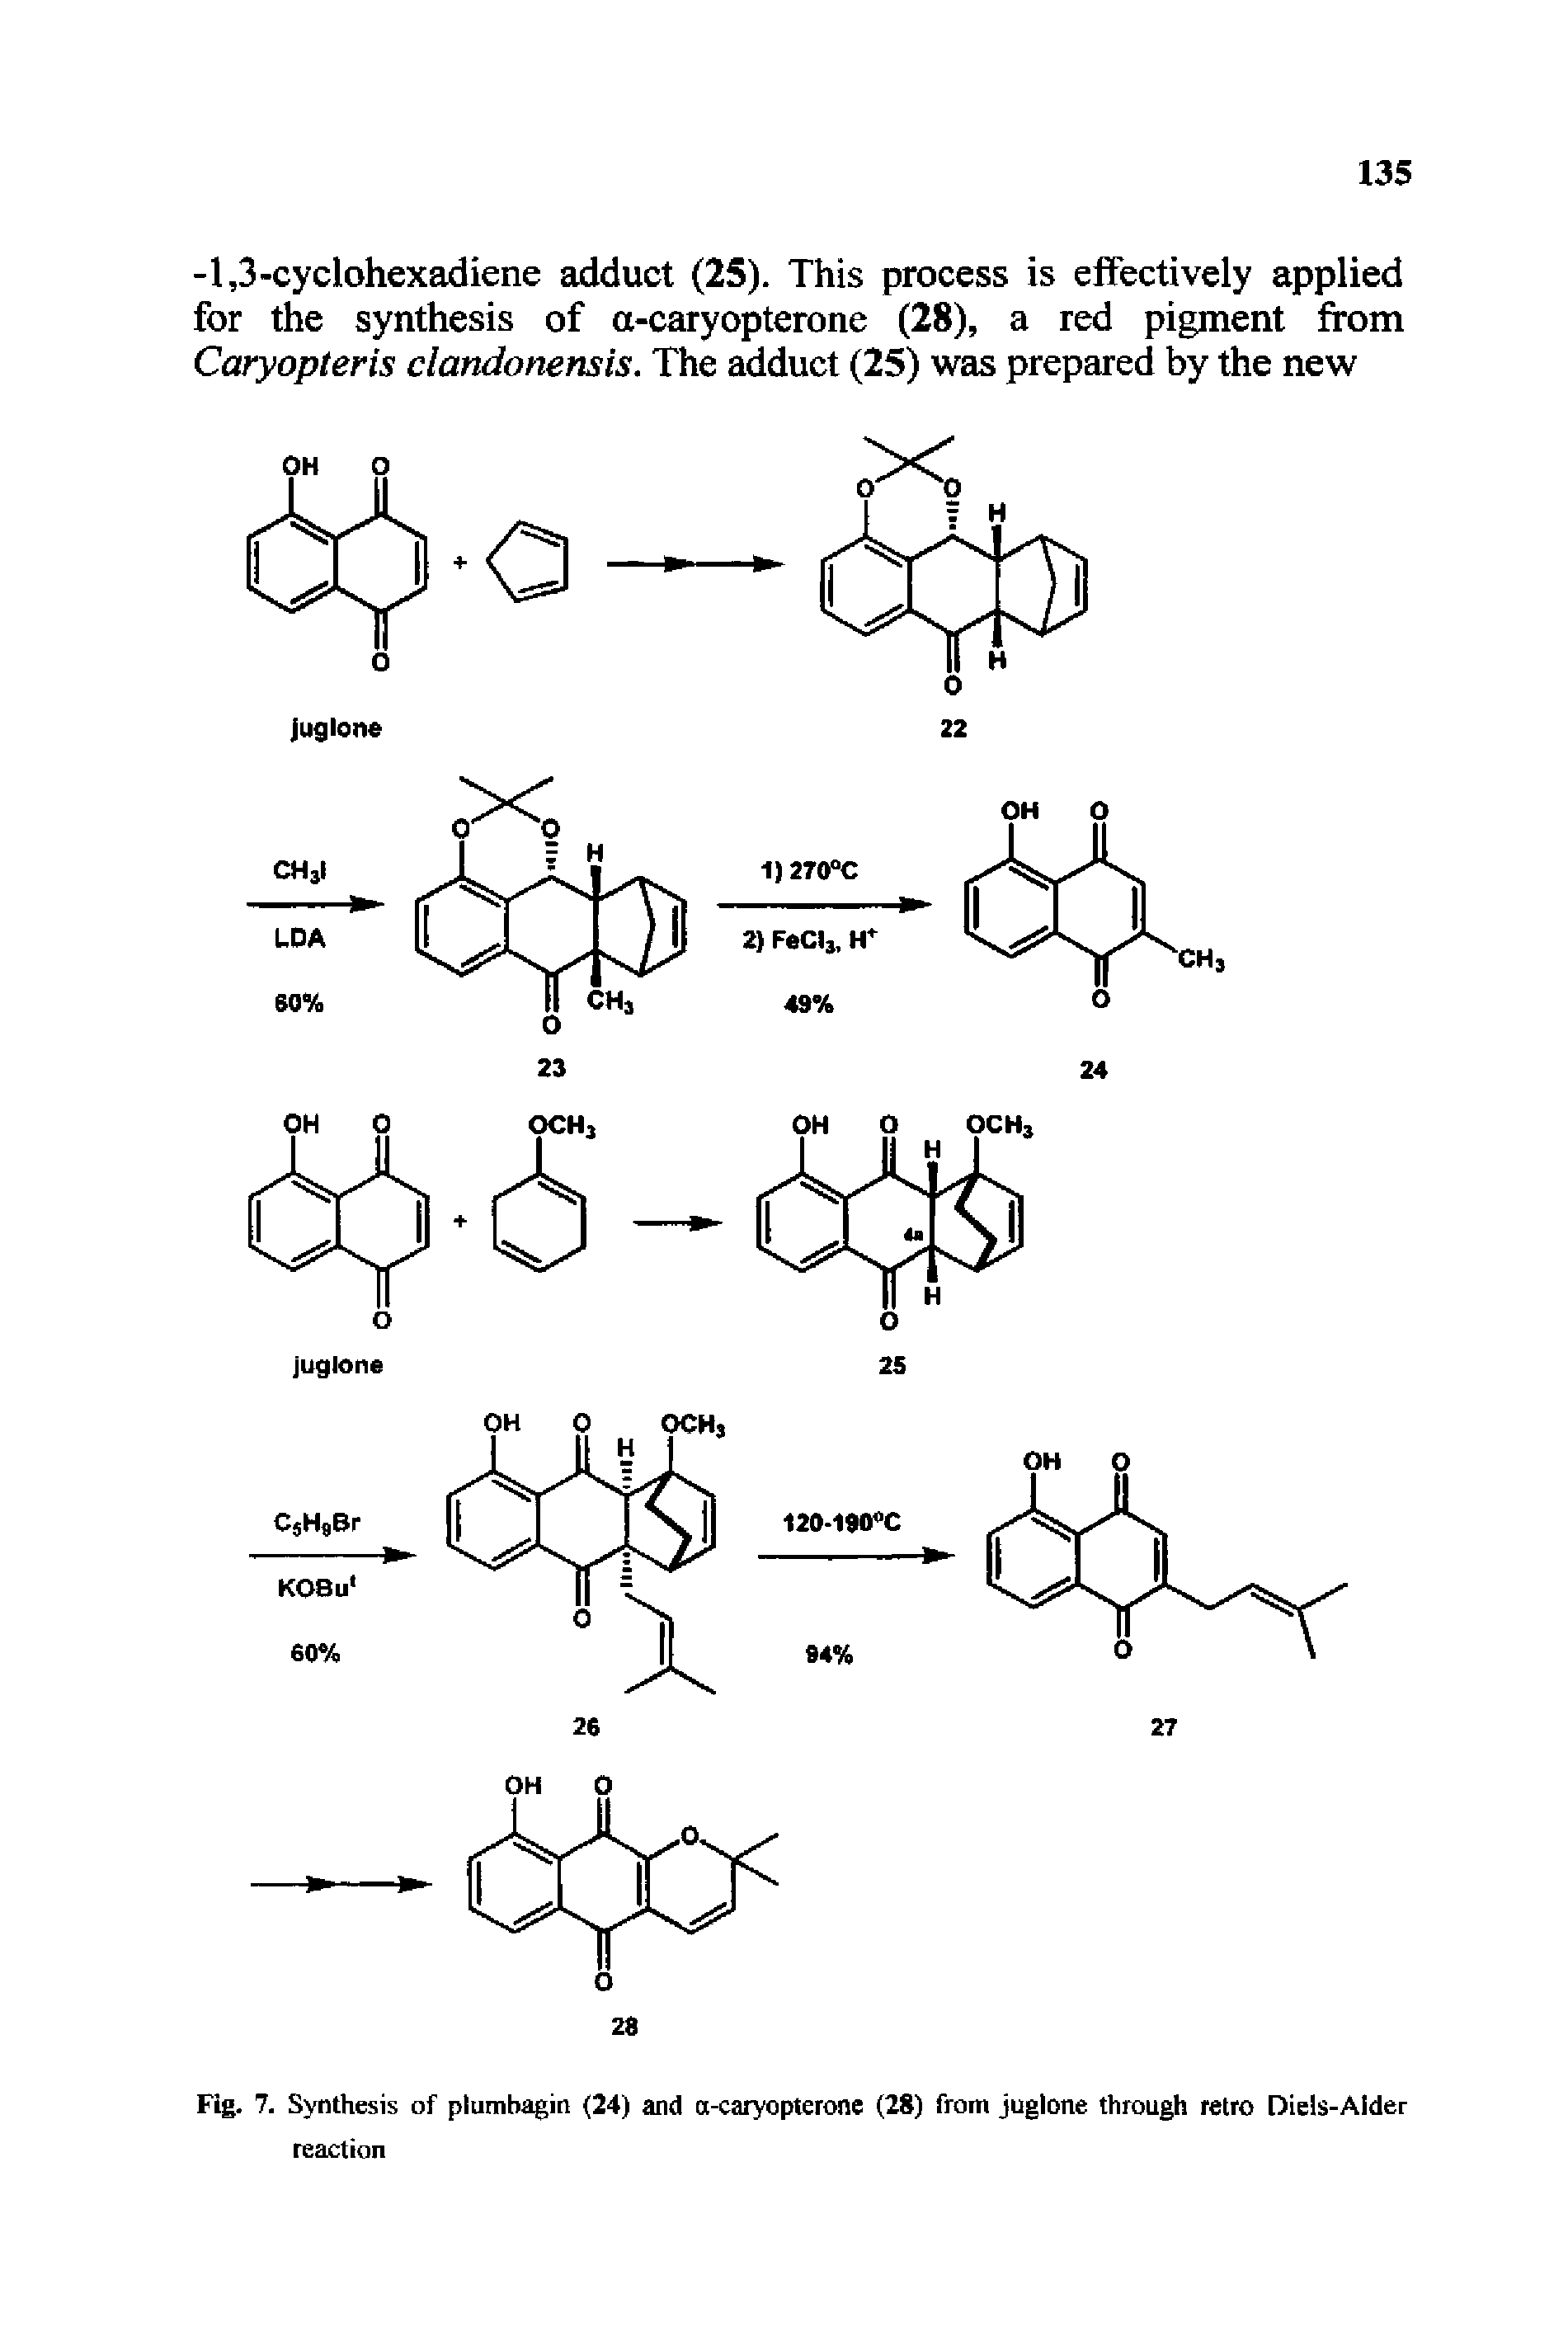 Fig. 7. Synthesis of ptumbagin (24) and a-caiyopterone (28) from juglone through retro Diels-Aider reaction...